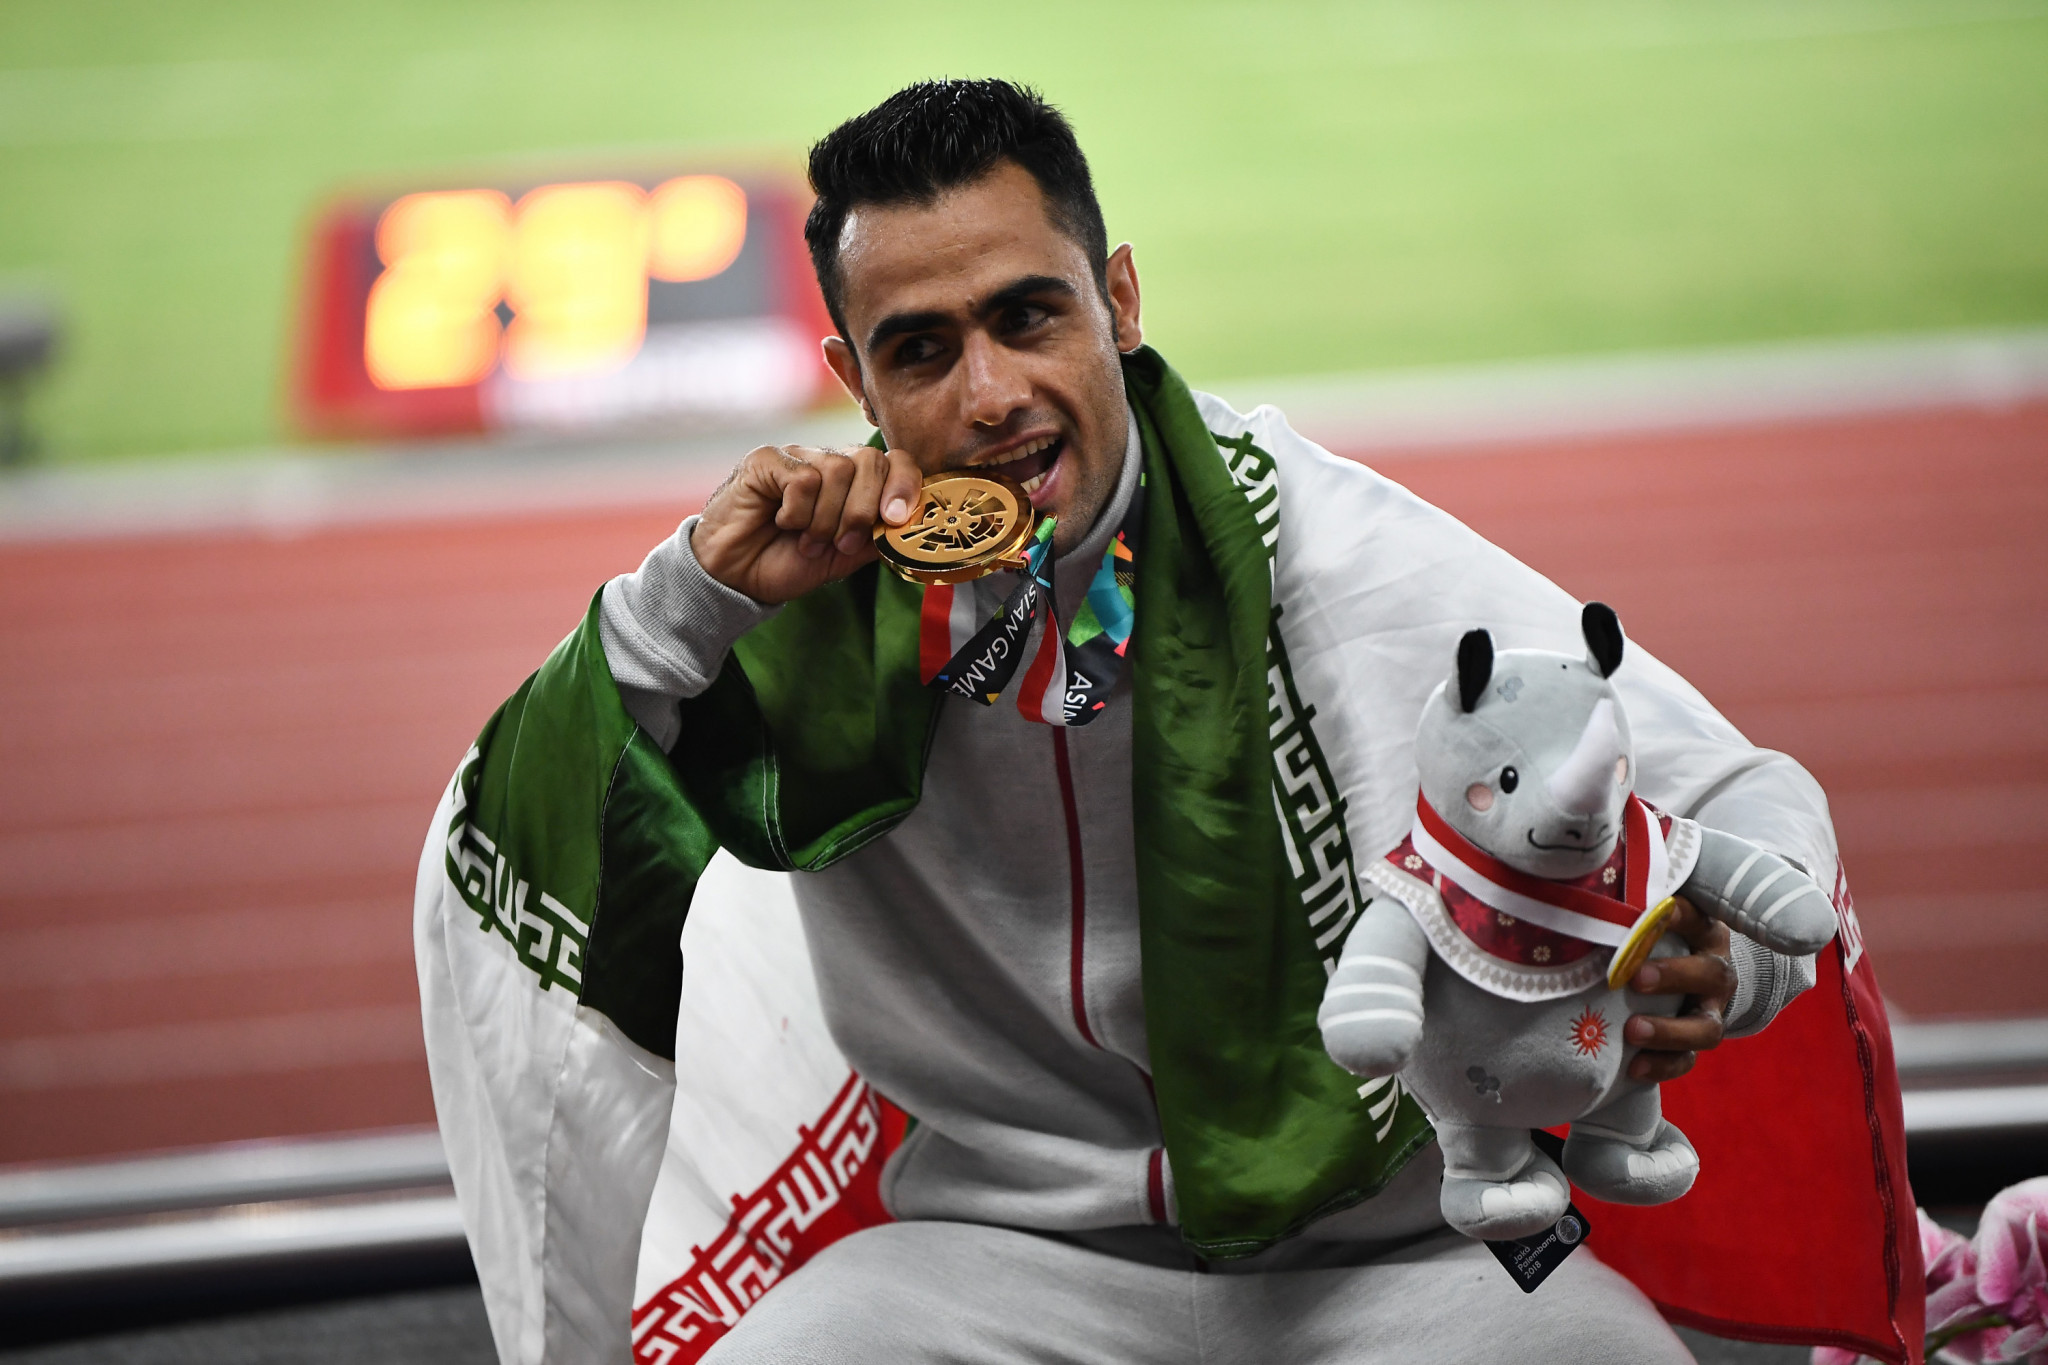 Hossein Keyhani set a new national and Asian Games record last year in the 3,000m steeplechase ©Getty Images